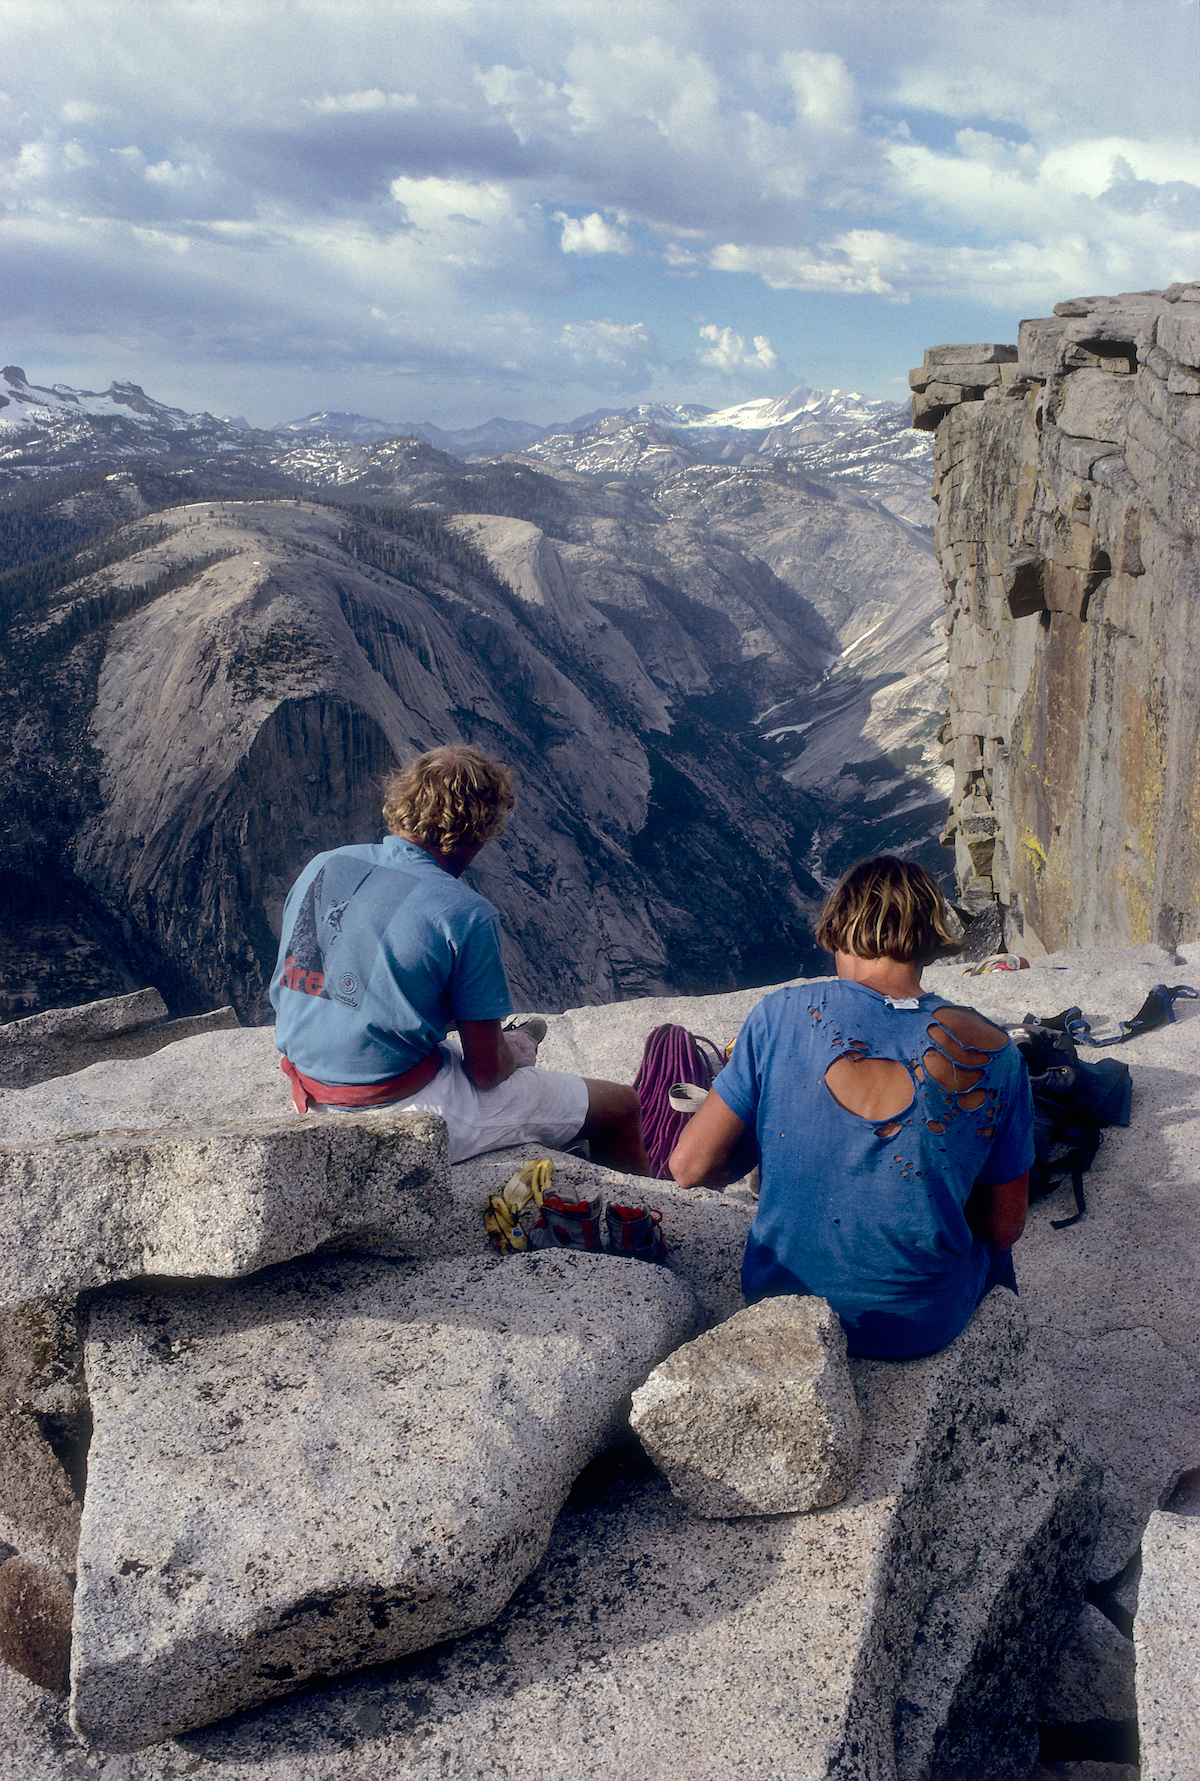 Photo from the back of Peter Croft and John Bachar after climbing El Capitan and Half Dome in a day.